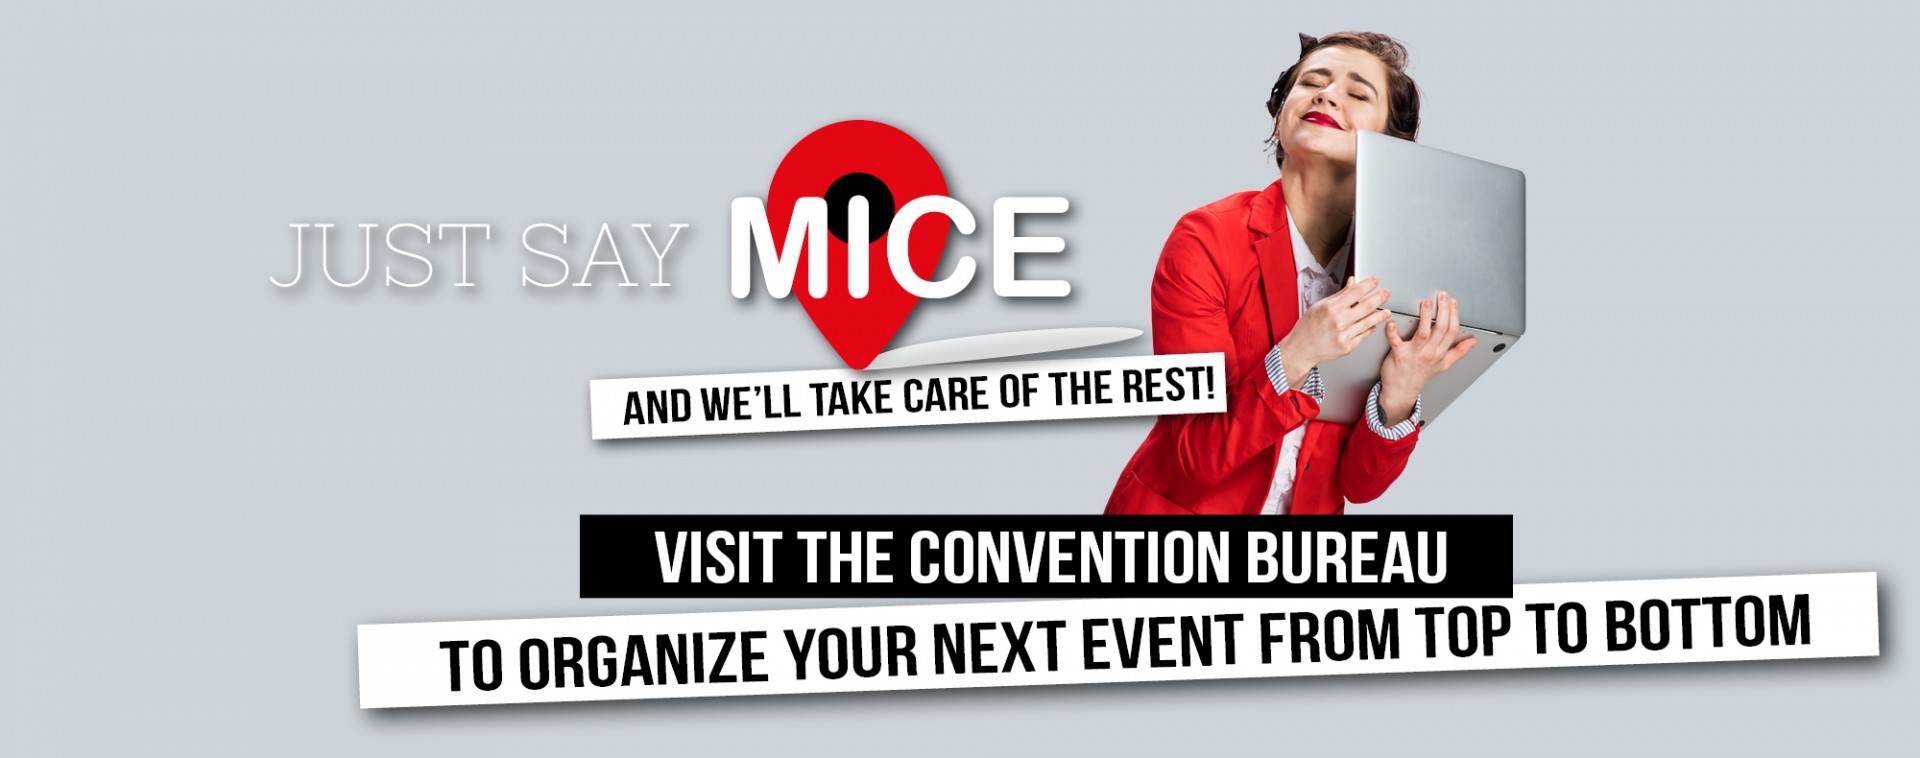 Just say MICE - Your event from A to Z - Liège-Spa Businessland | © Getty Images